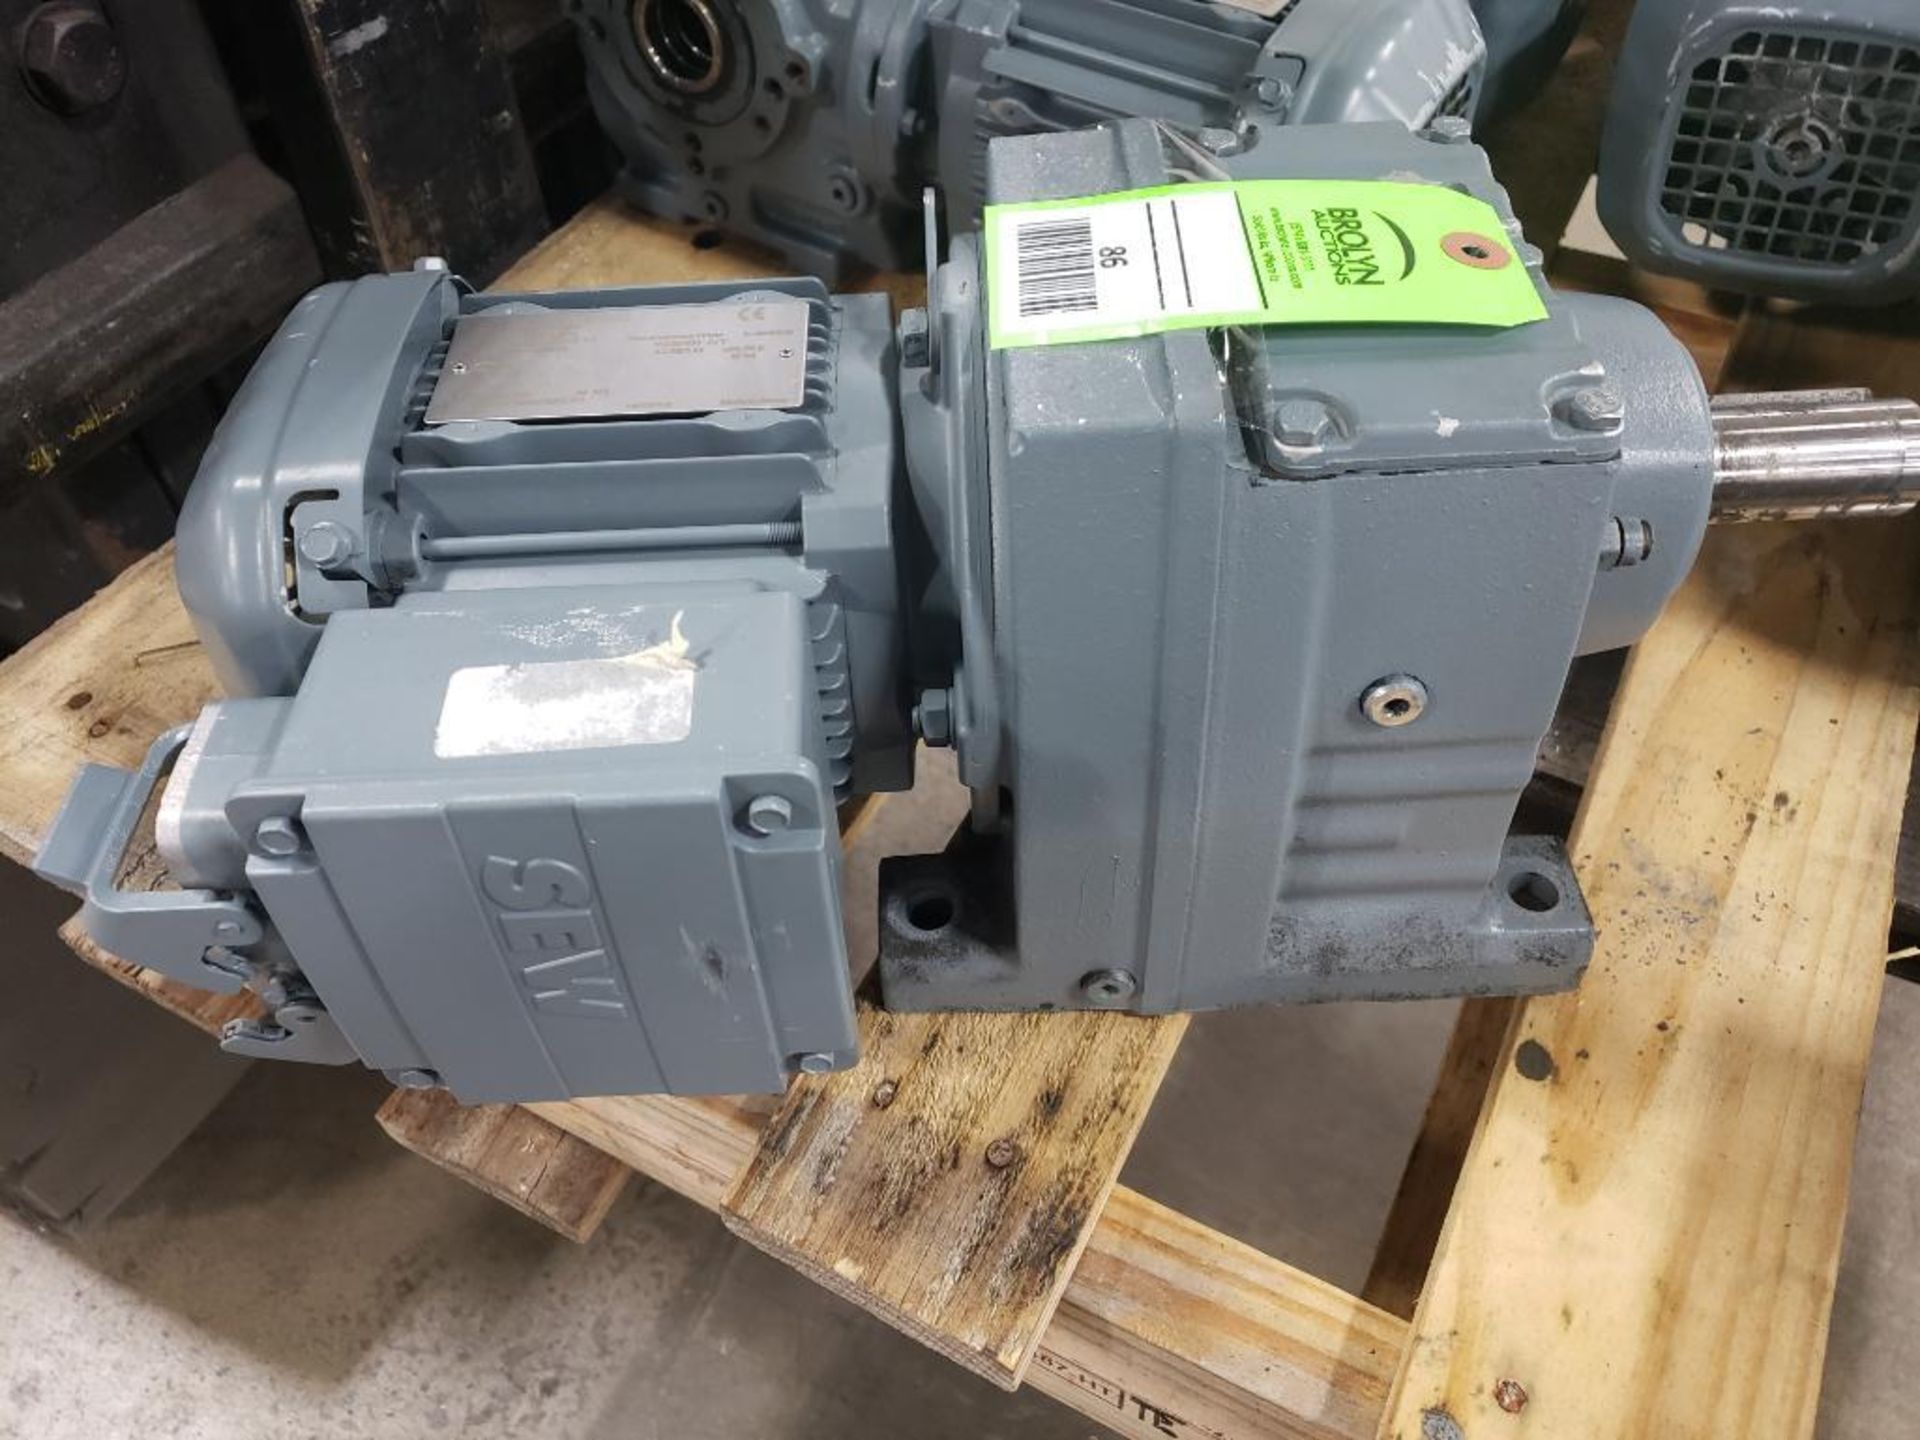 Sew Eurodrive motor and gearbox. Model R47-DRS71S4/ASB1.